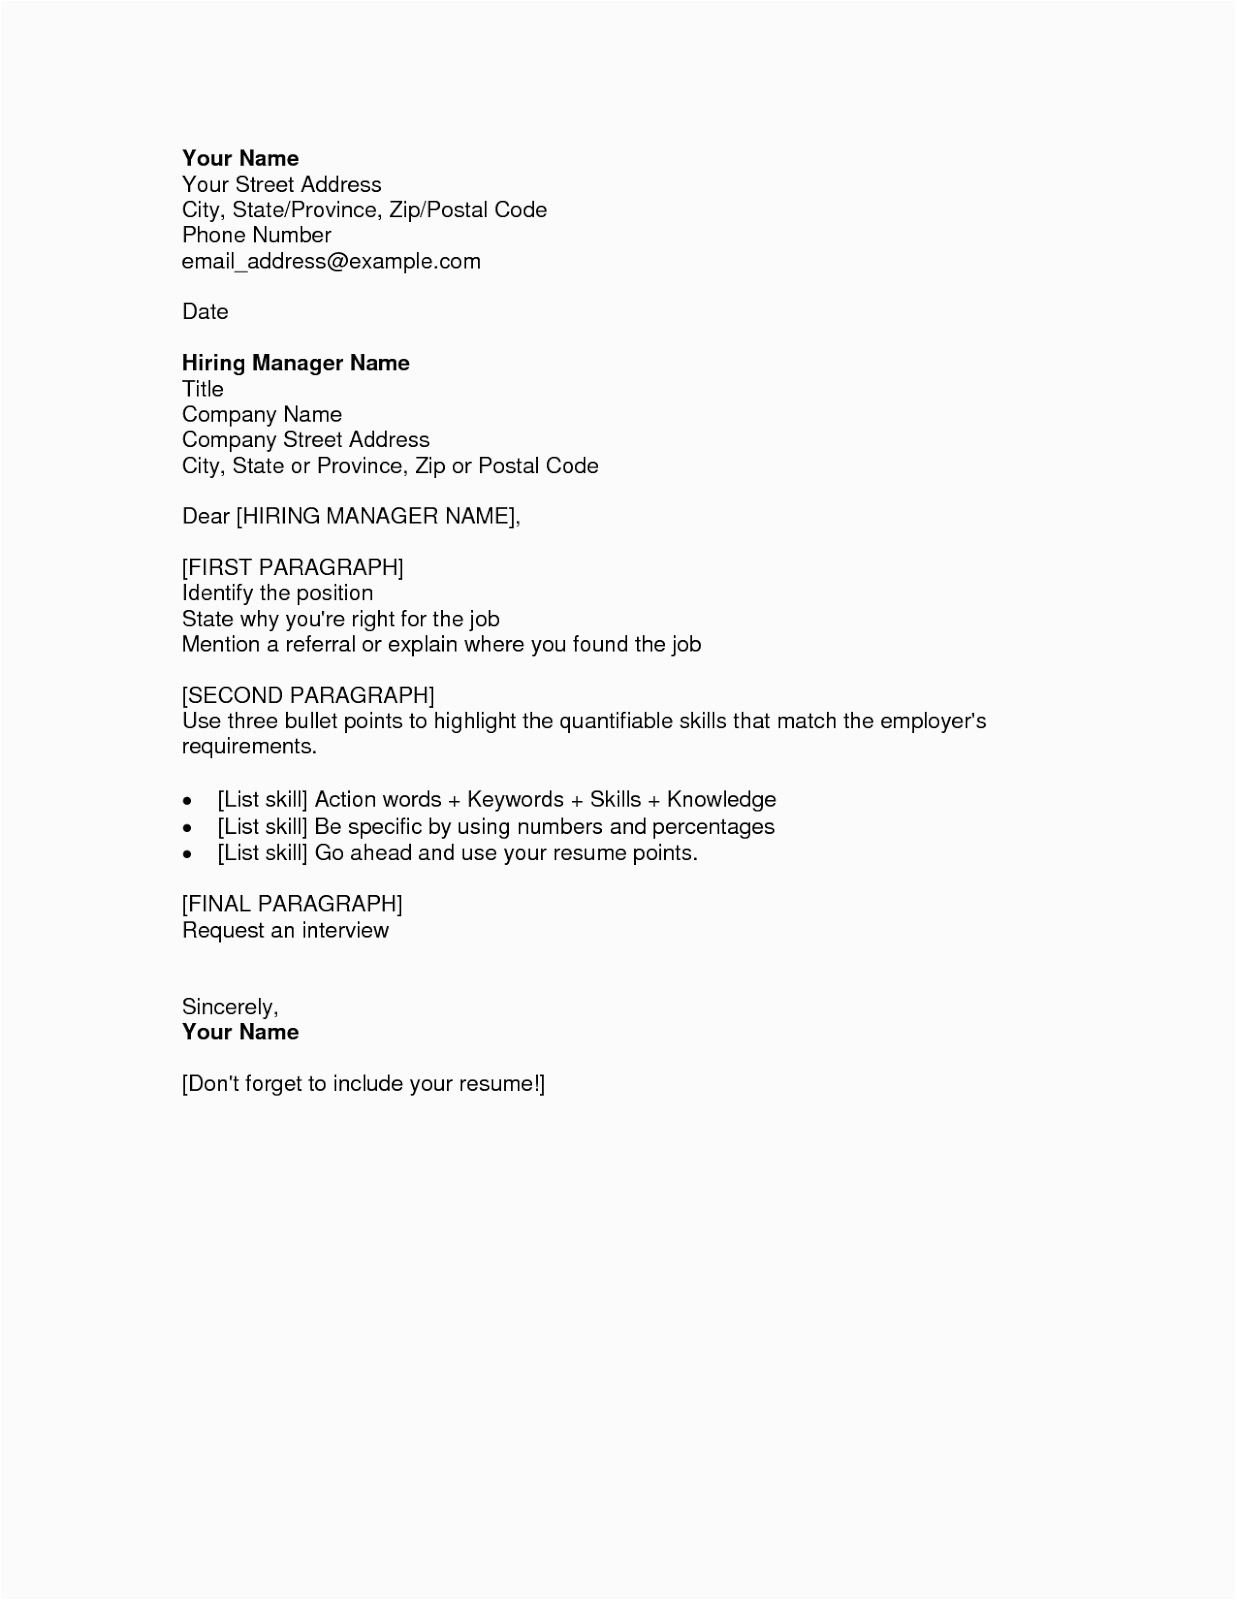 Free Template for Cover Letter for Resume Free Cover Letter Samples for Resumes